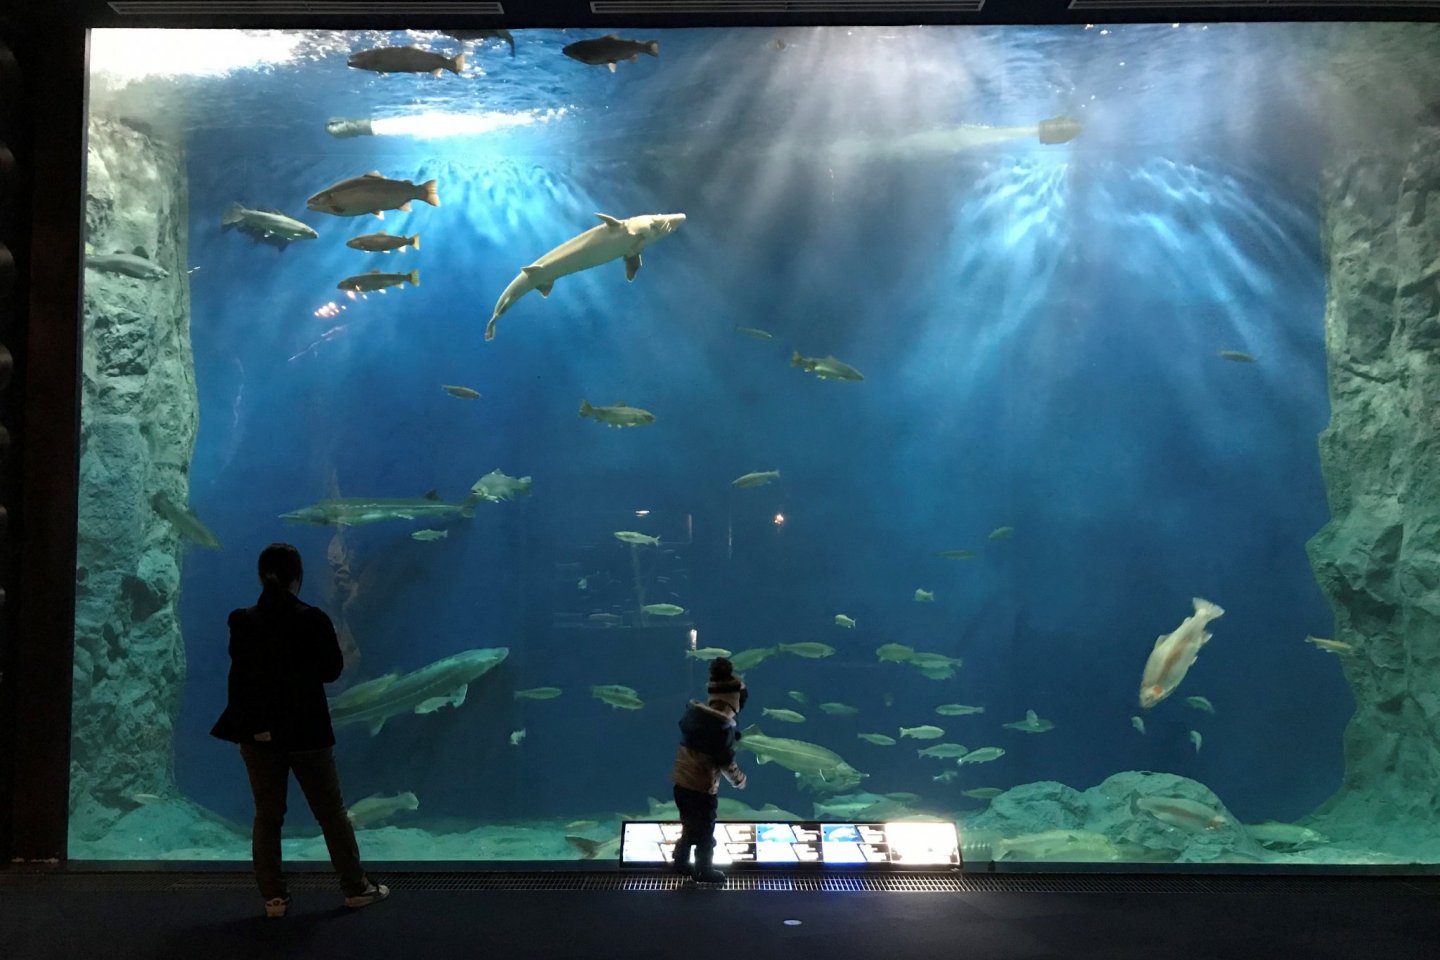 Though smaller than similar aquariums in Osaka and Okinawa, it is a more intimate experience here in Chitose